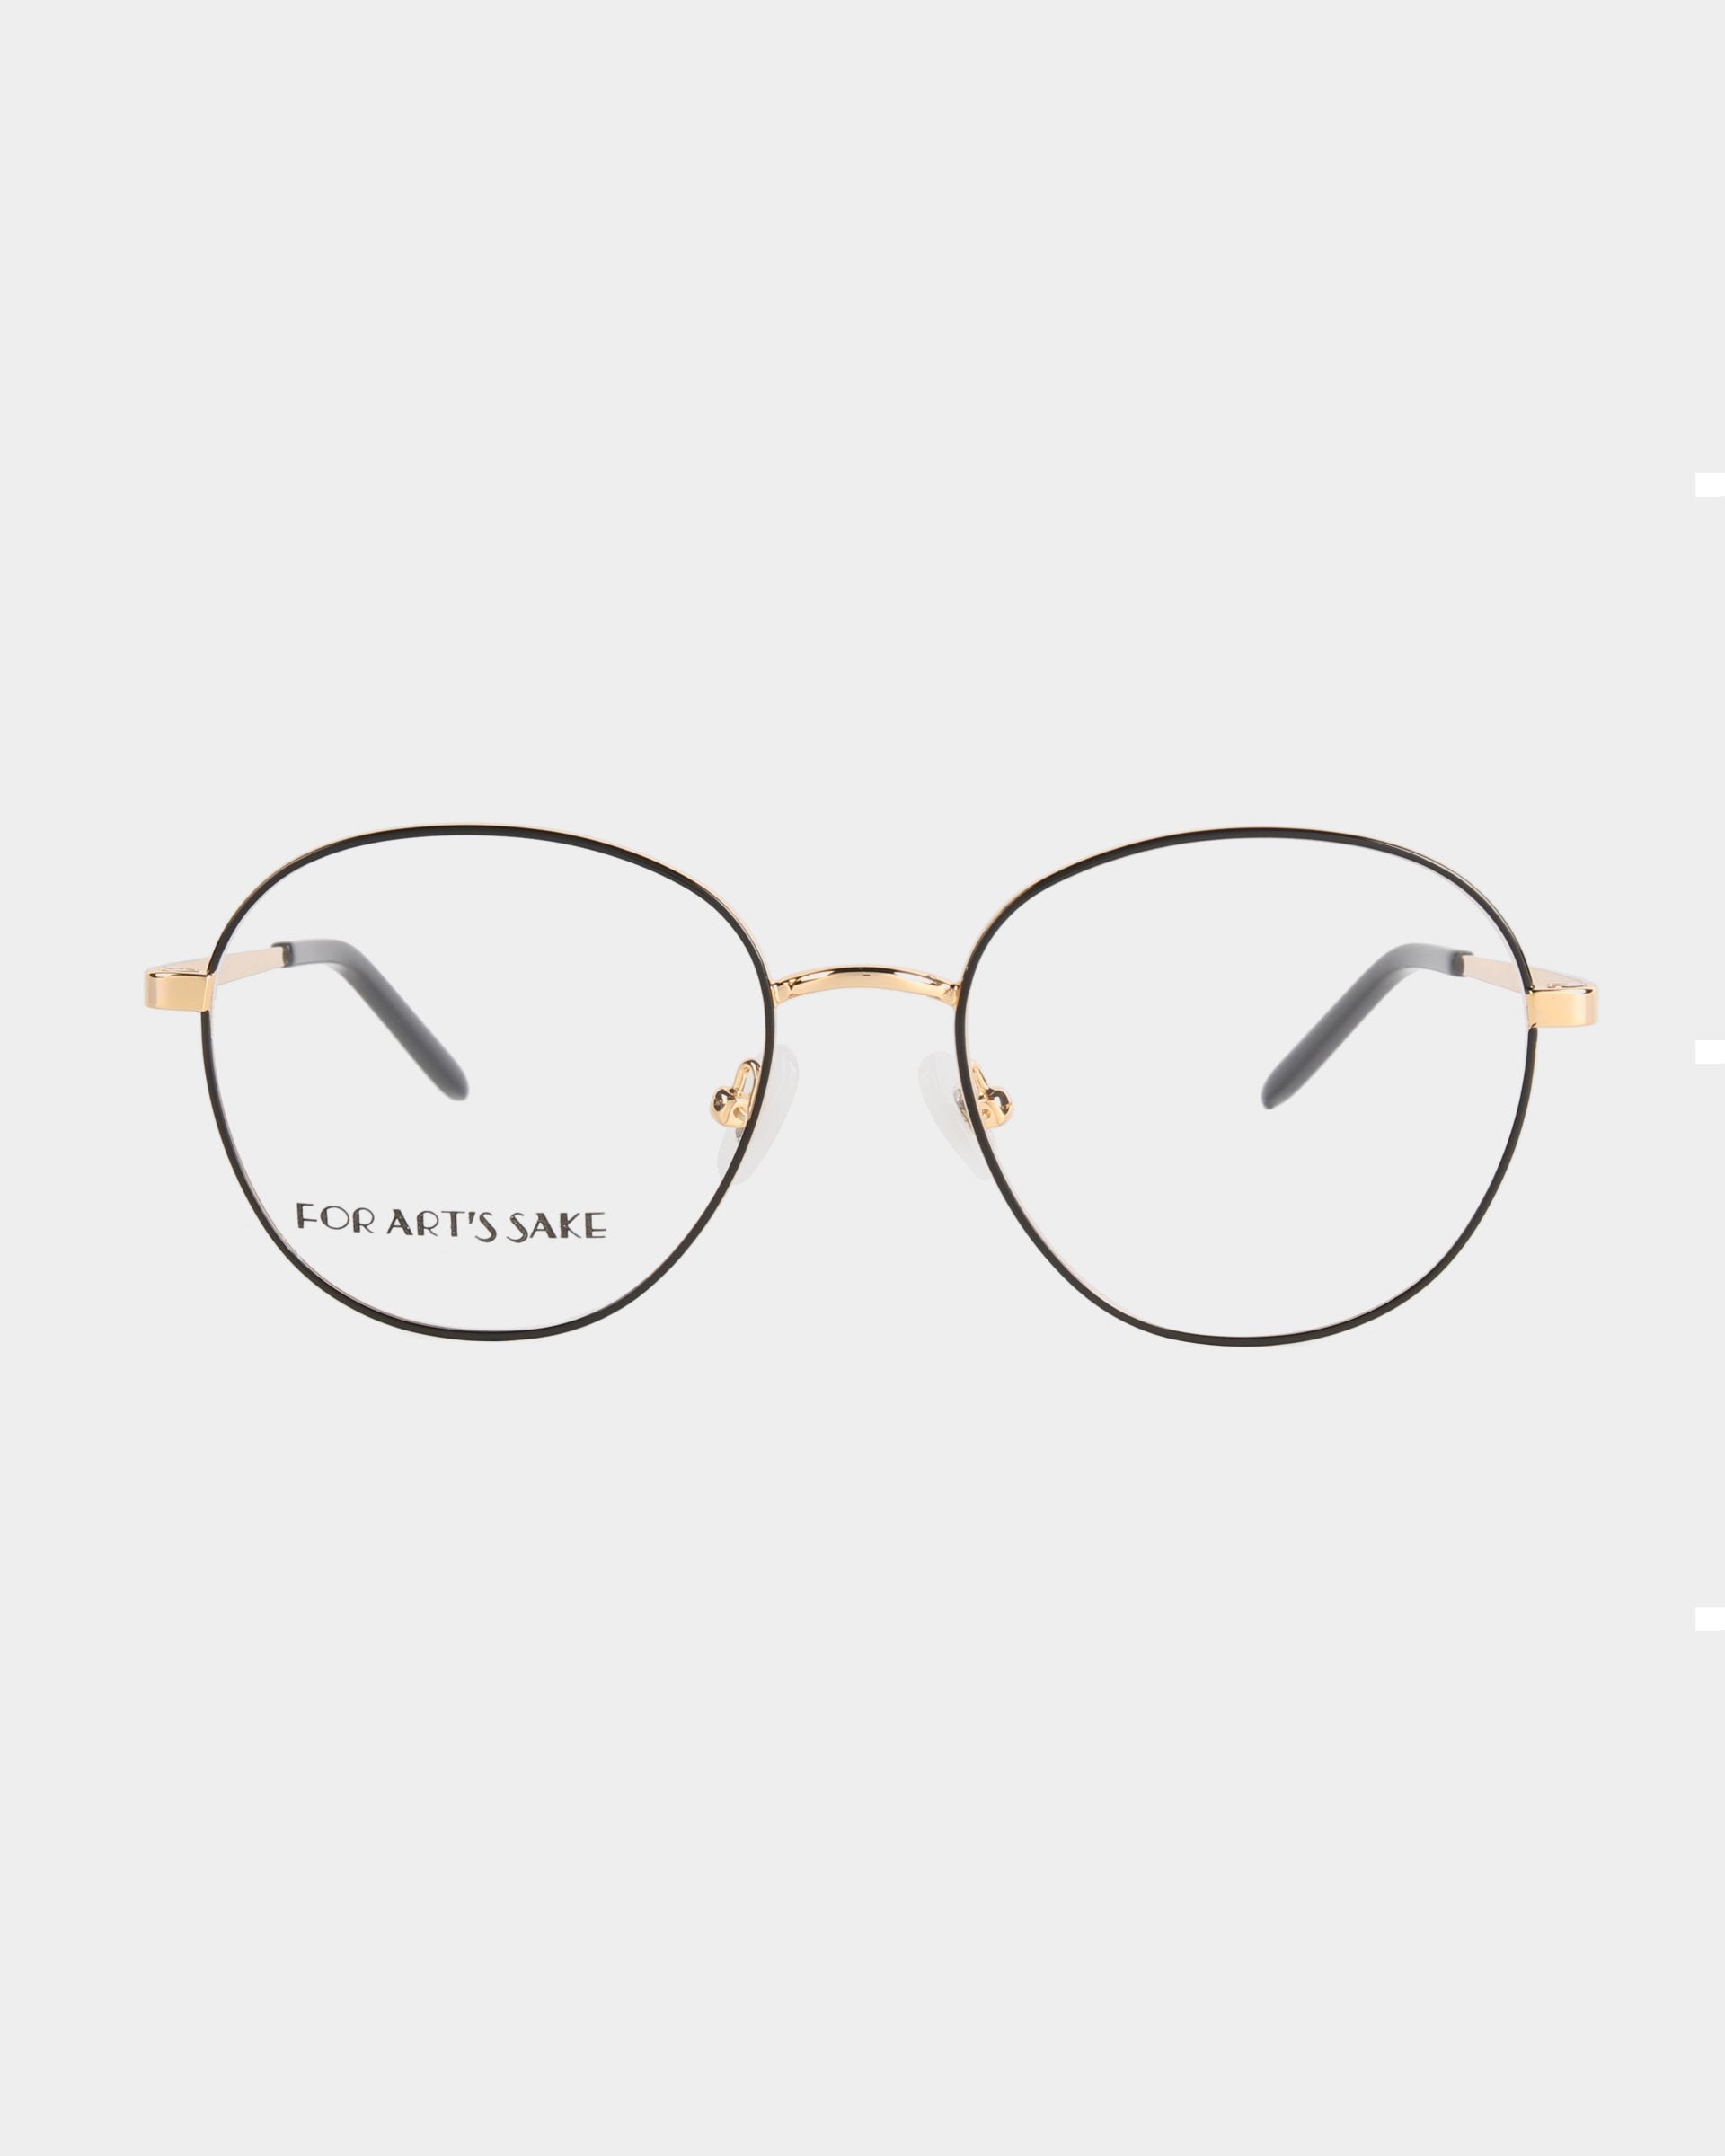 A pair of round, thin-framed eyeglasses with gold rims and black temple tips. These stylish glasses feature adjustable nose pads for a perfect fit and a minimalist design with clear lenses. The small inscription "For Art's Sake®" graces the left lens, adding a unique touch to the Hailey model.